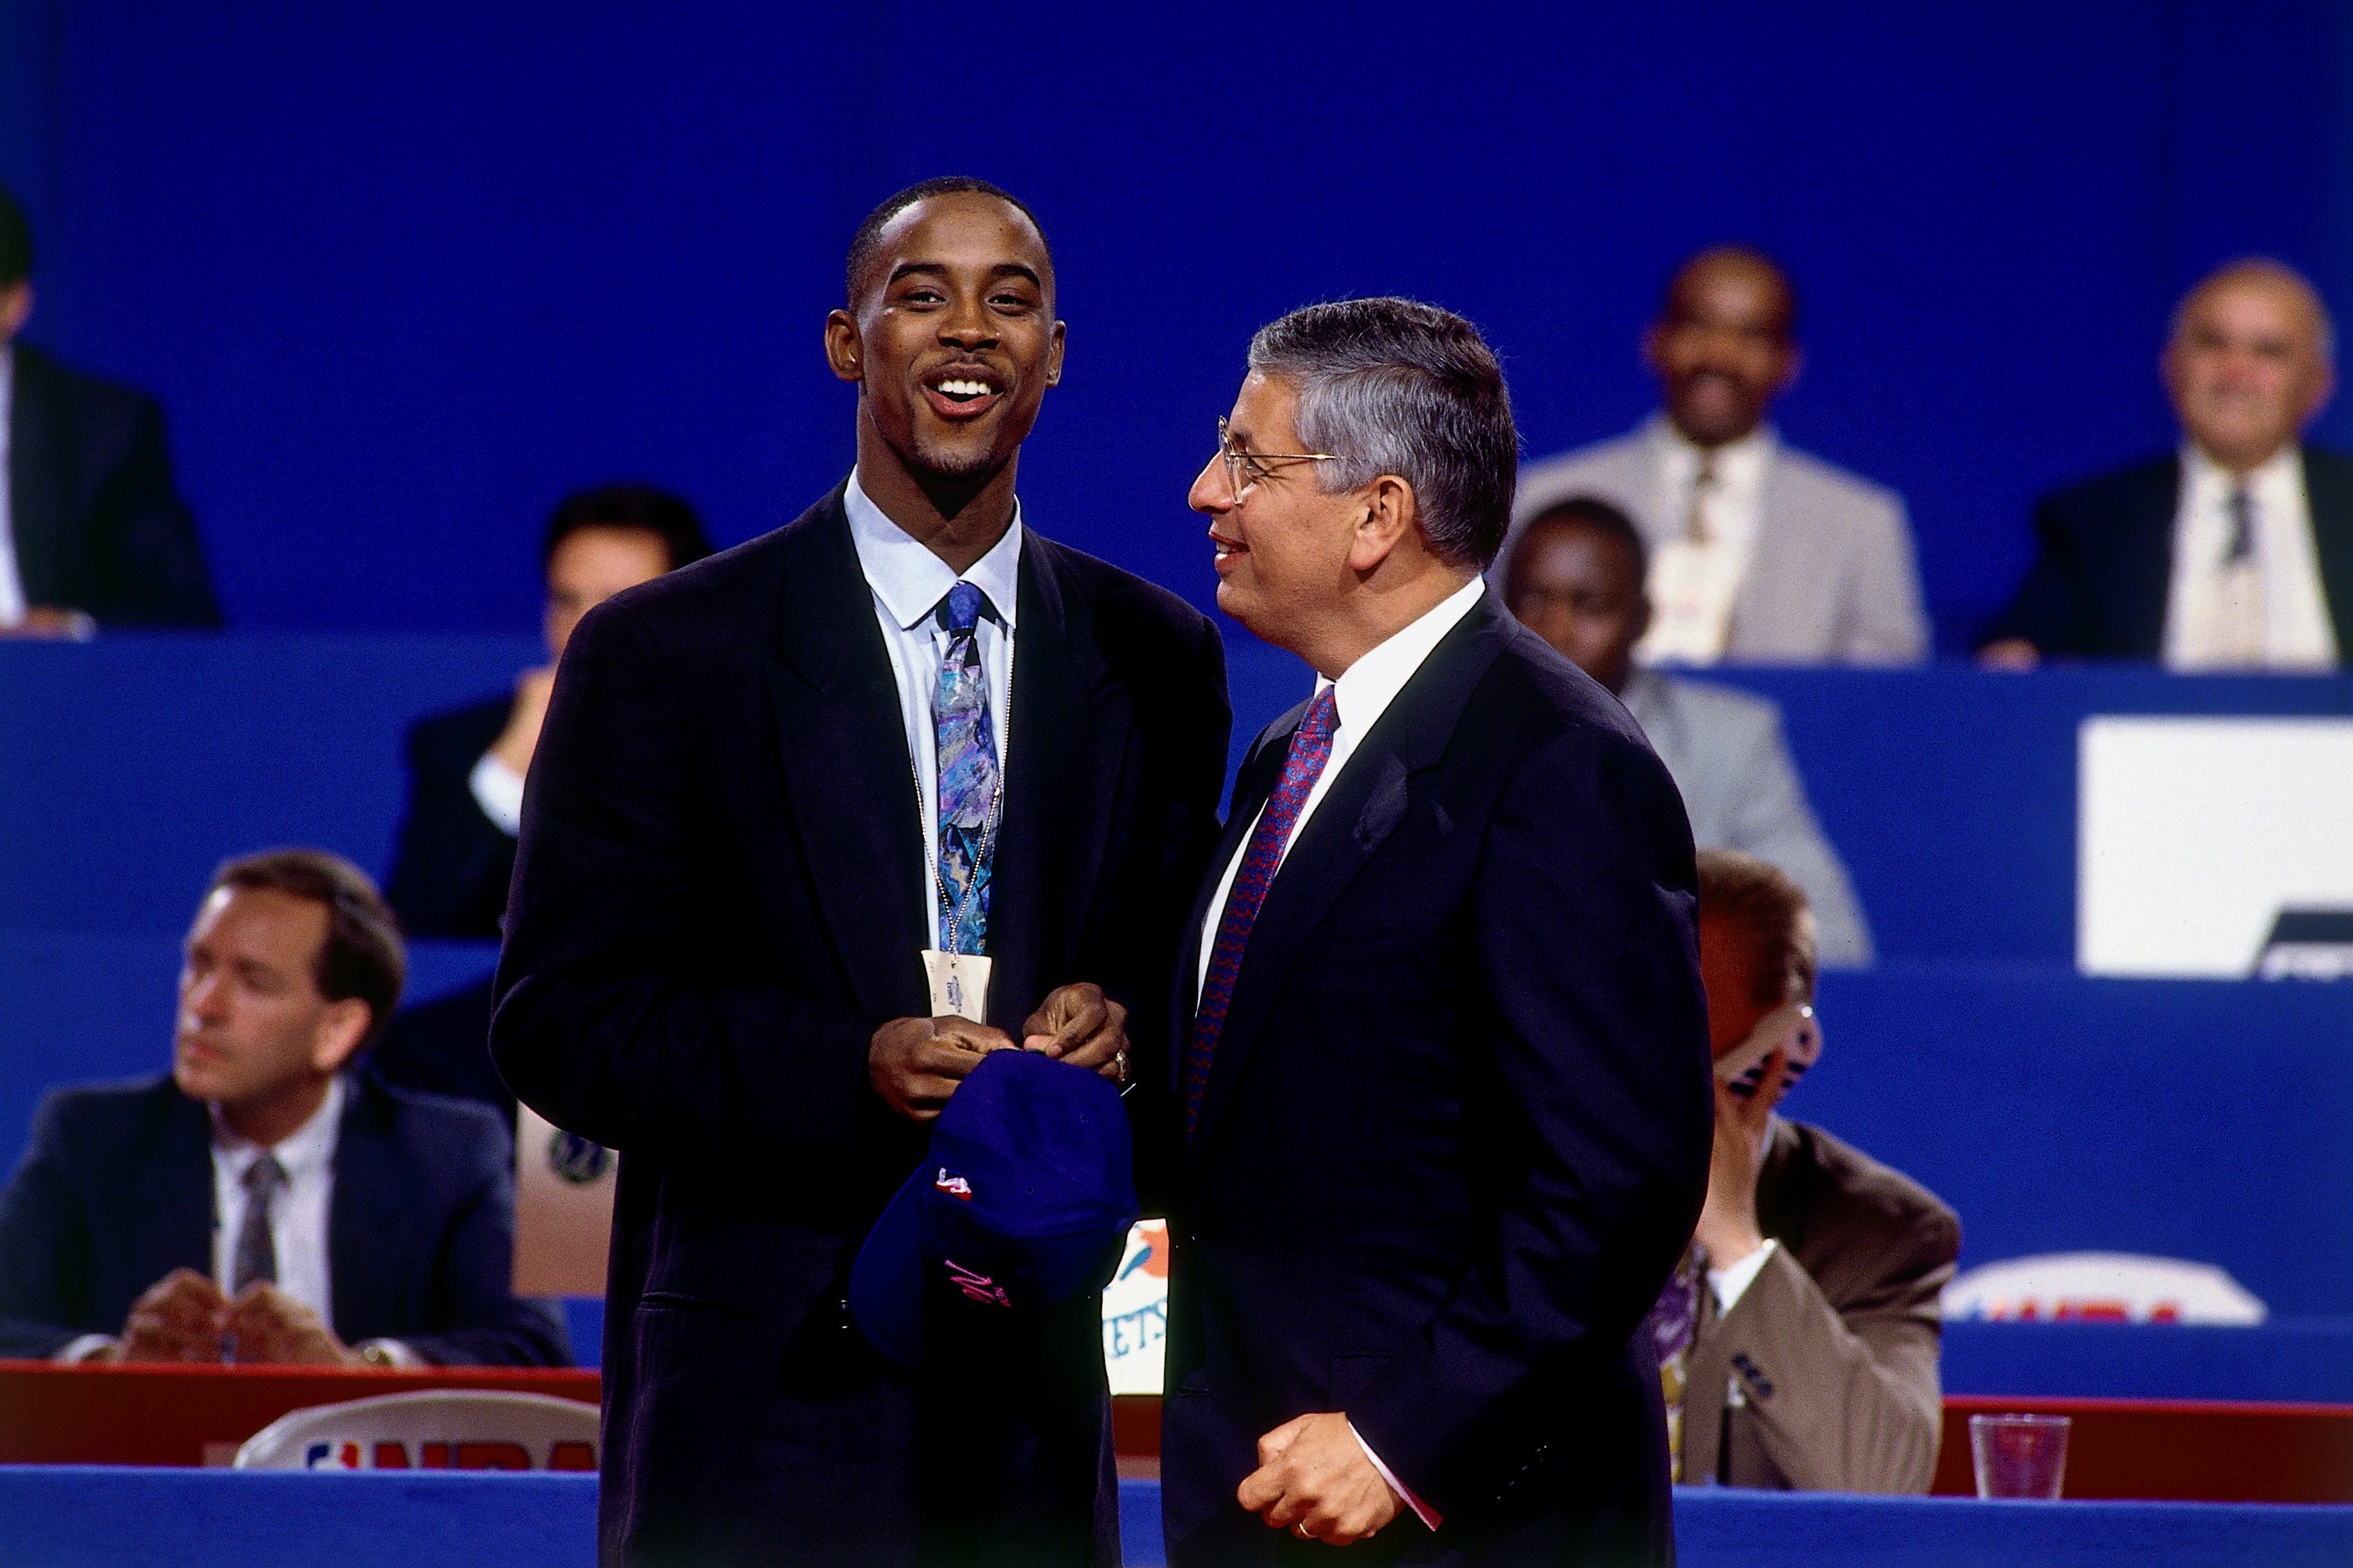 NEW YORK - JUNE 26: Kenny Anderson shakes hands with NBA Commissioner David Stern after he was selected number two overall by the New Jersey Nets during the 1991 NBA Draft on June 26, 1991 at Madison Square Garden in New York, New York. NOTE TO USER: User expressly acknowledges that, by downloading and or using this photograph, User is consenting to the terms and conditions of the Getty Images License agreement. Mandatory Copyright Notice: Copyright 1996 NBAE (Photo by Nathaniel S. Butler/NBAE via Getty Images)